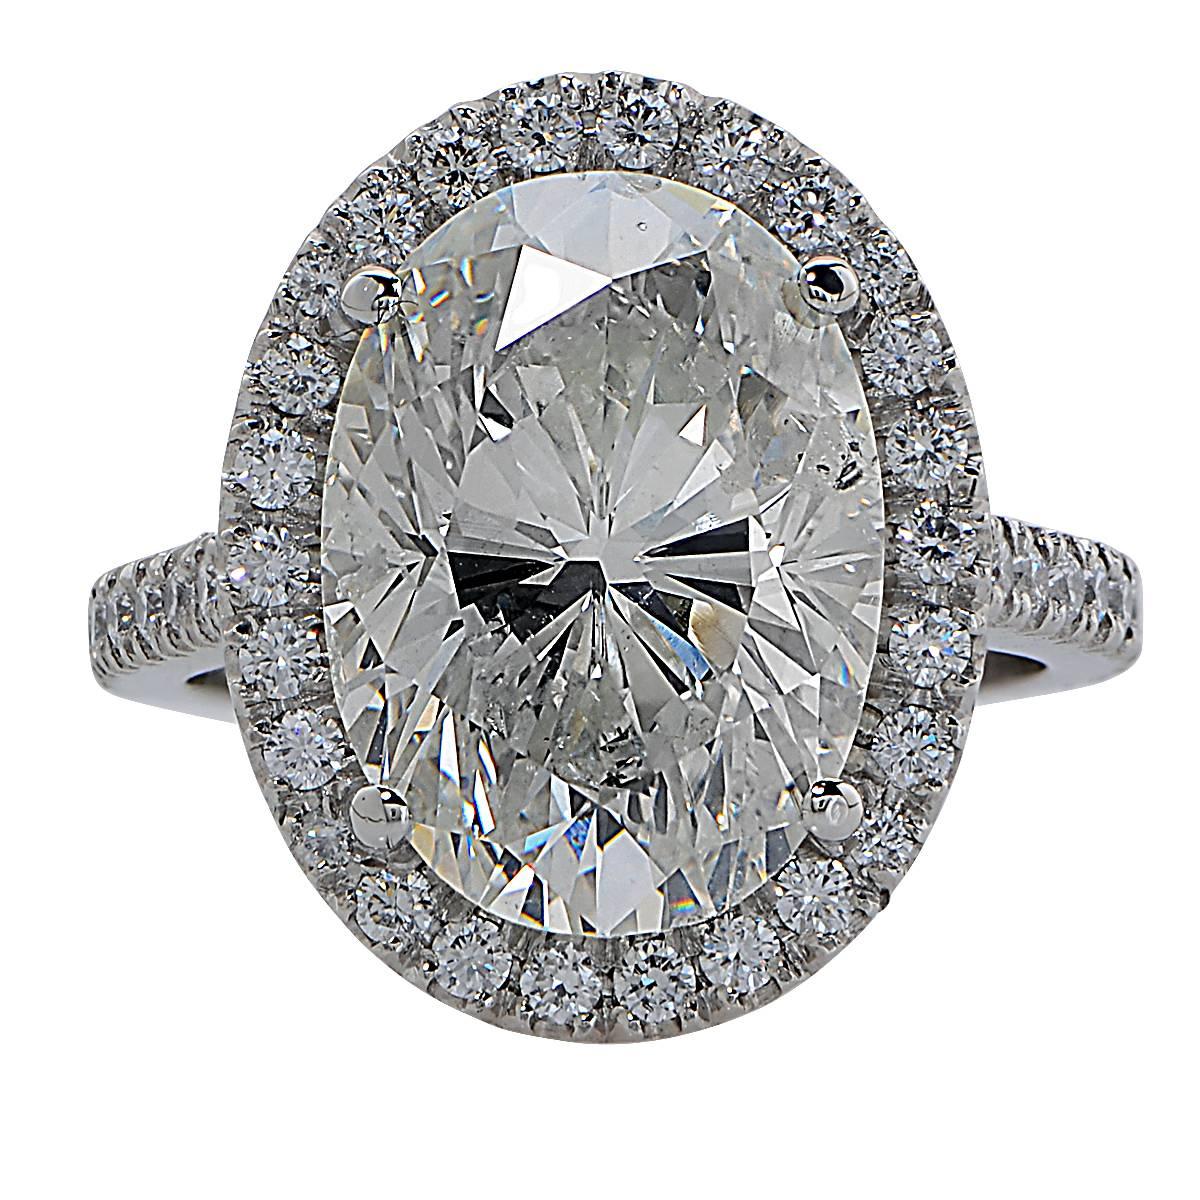 Platinum Ring Containing a 7.52 Carat, I Color, SI2 Clarity, Oval Diamond Surrounded by 48 Round Brilliant Cut Diamonds Weighing .67 Carats, G-H Color, VS Clarity.